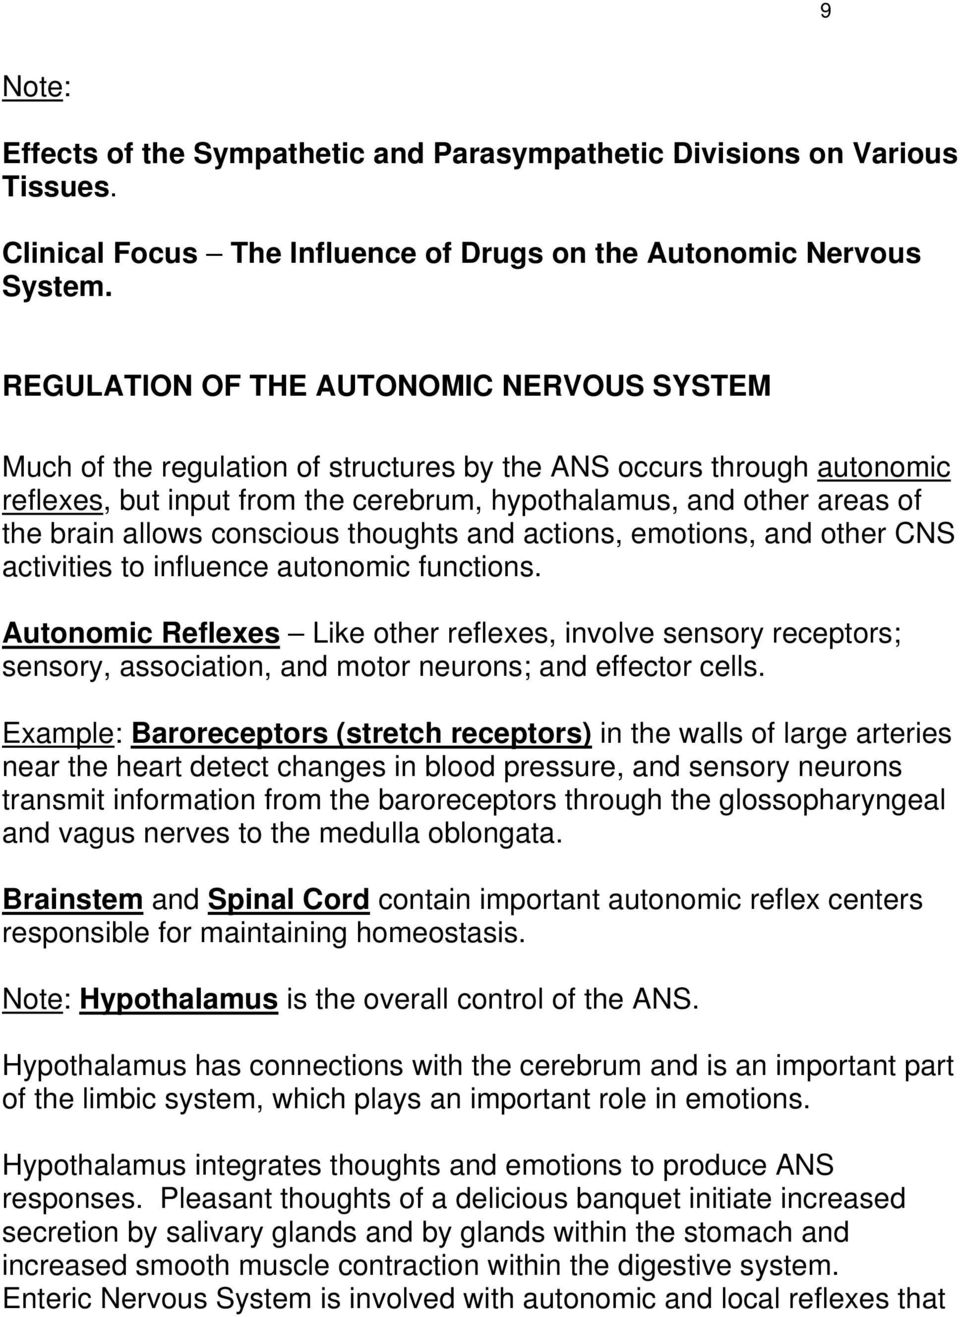 allows conscious thoughts and actions, emotions, and other CNS activities to influence autonomic functions.